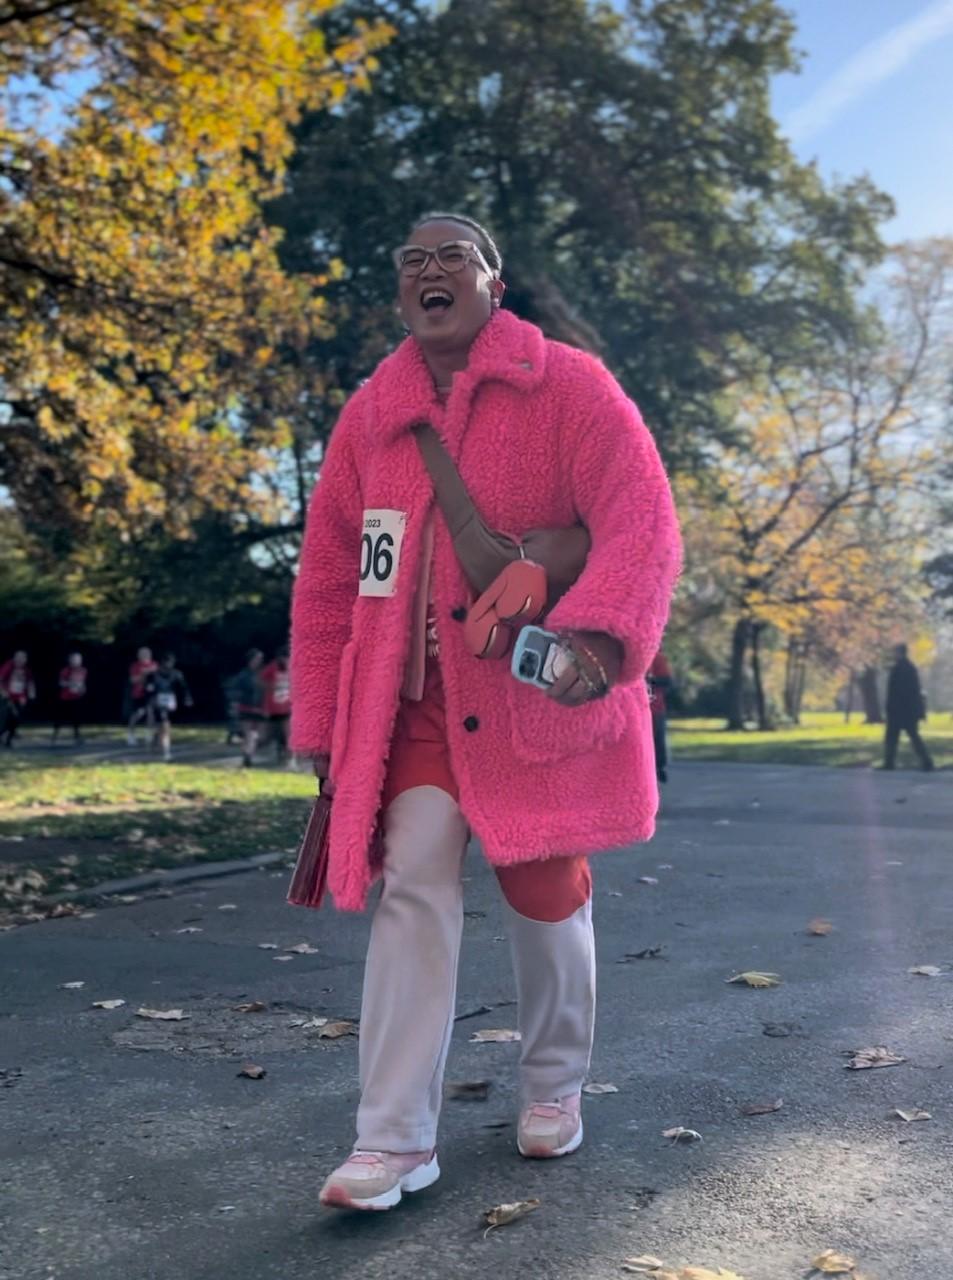 Person walking in bright pink coat